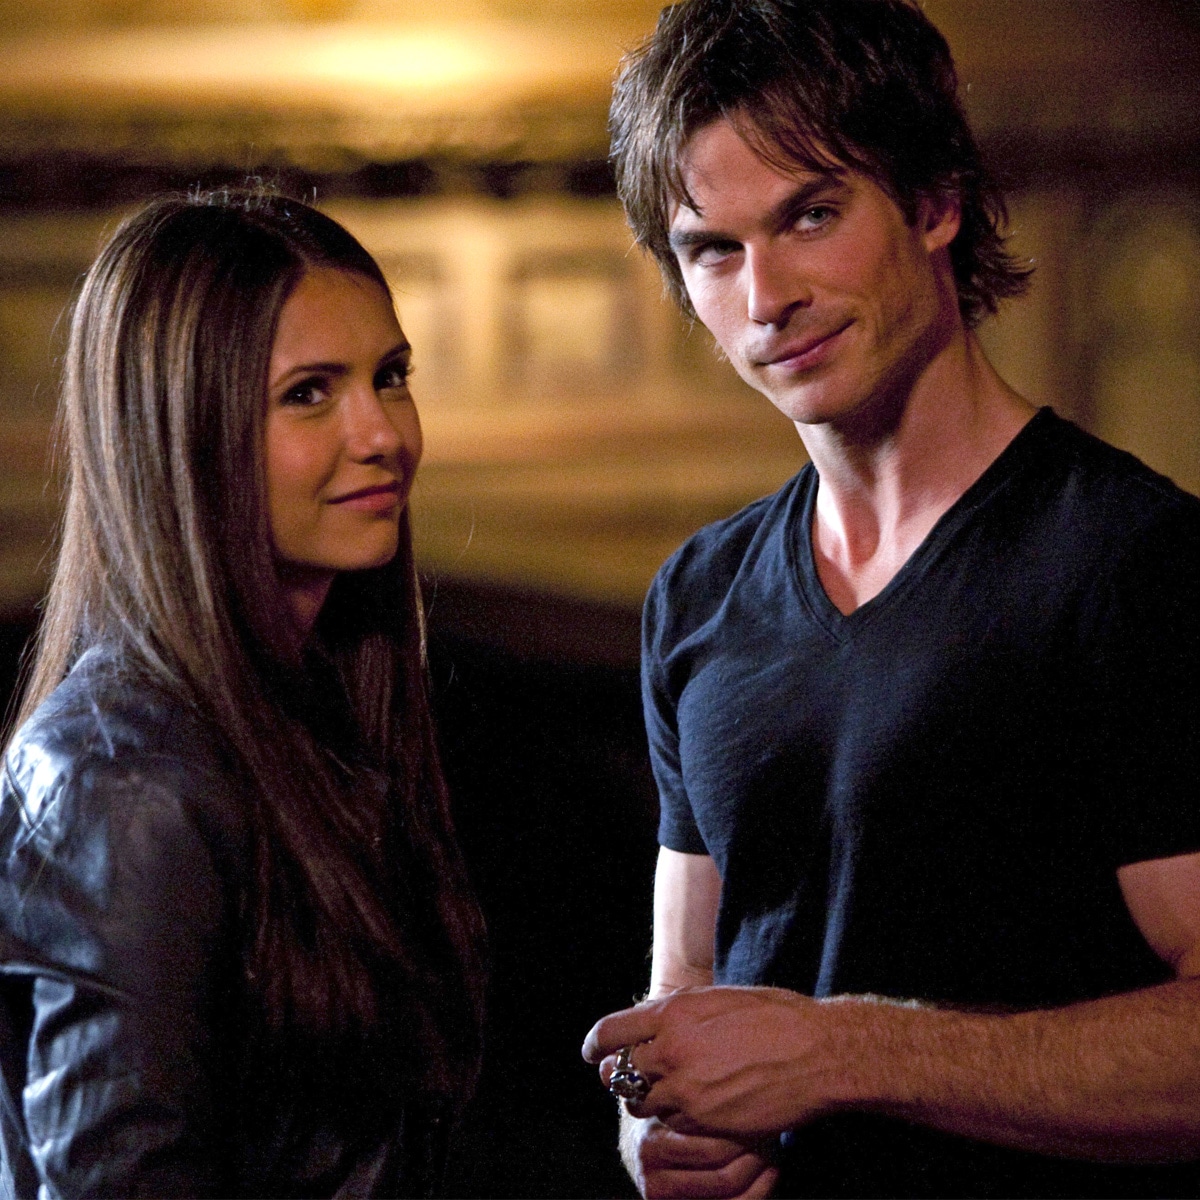 How TVD Fans Caused Ian Somerhalder's Character to Be Rewritten - E! Online